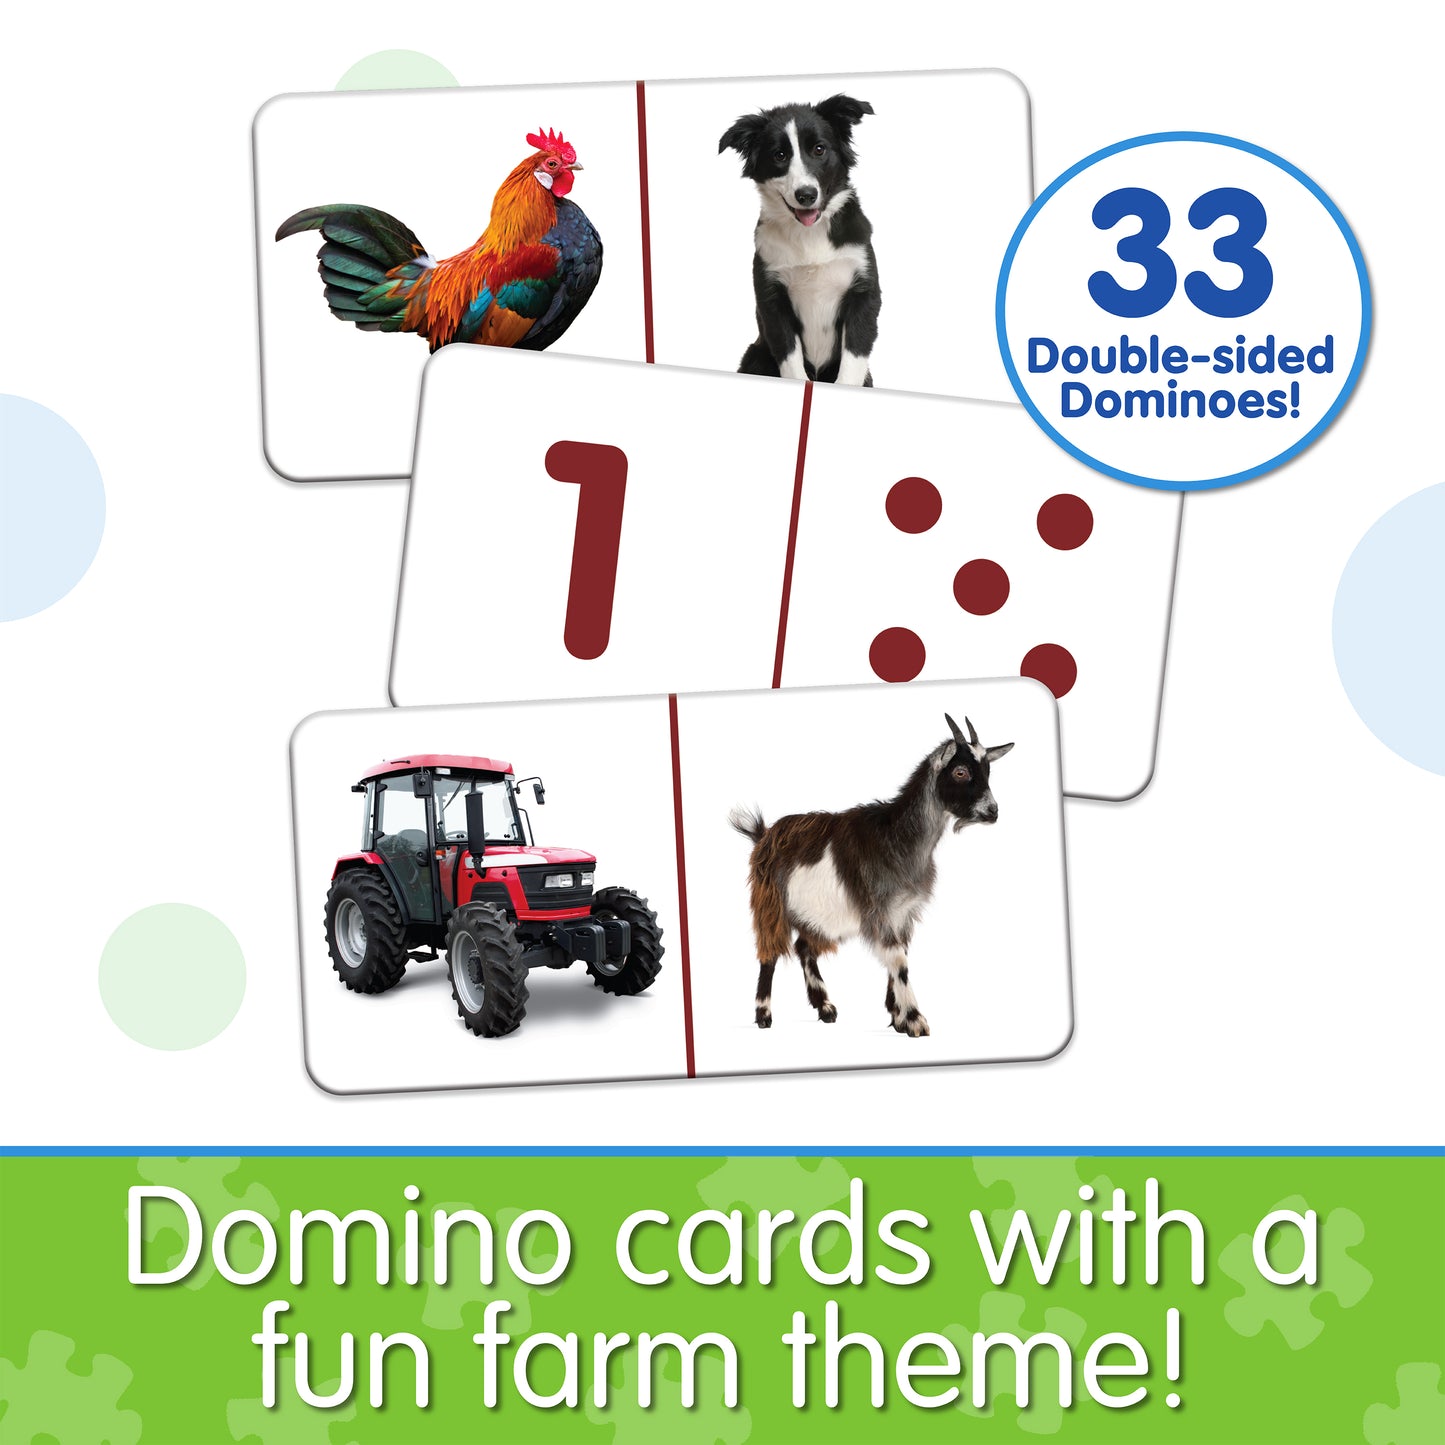 Infographic about Match It - Farminoes that says, "Domino cards with a fun farm theme!"